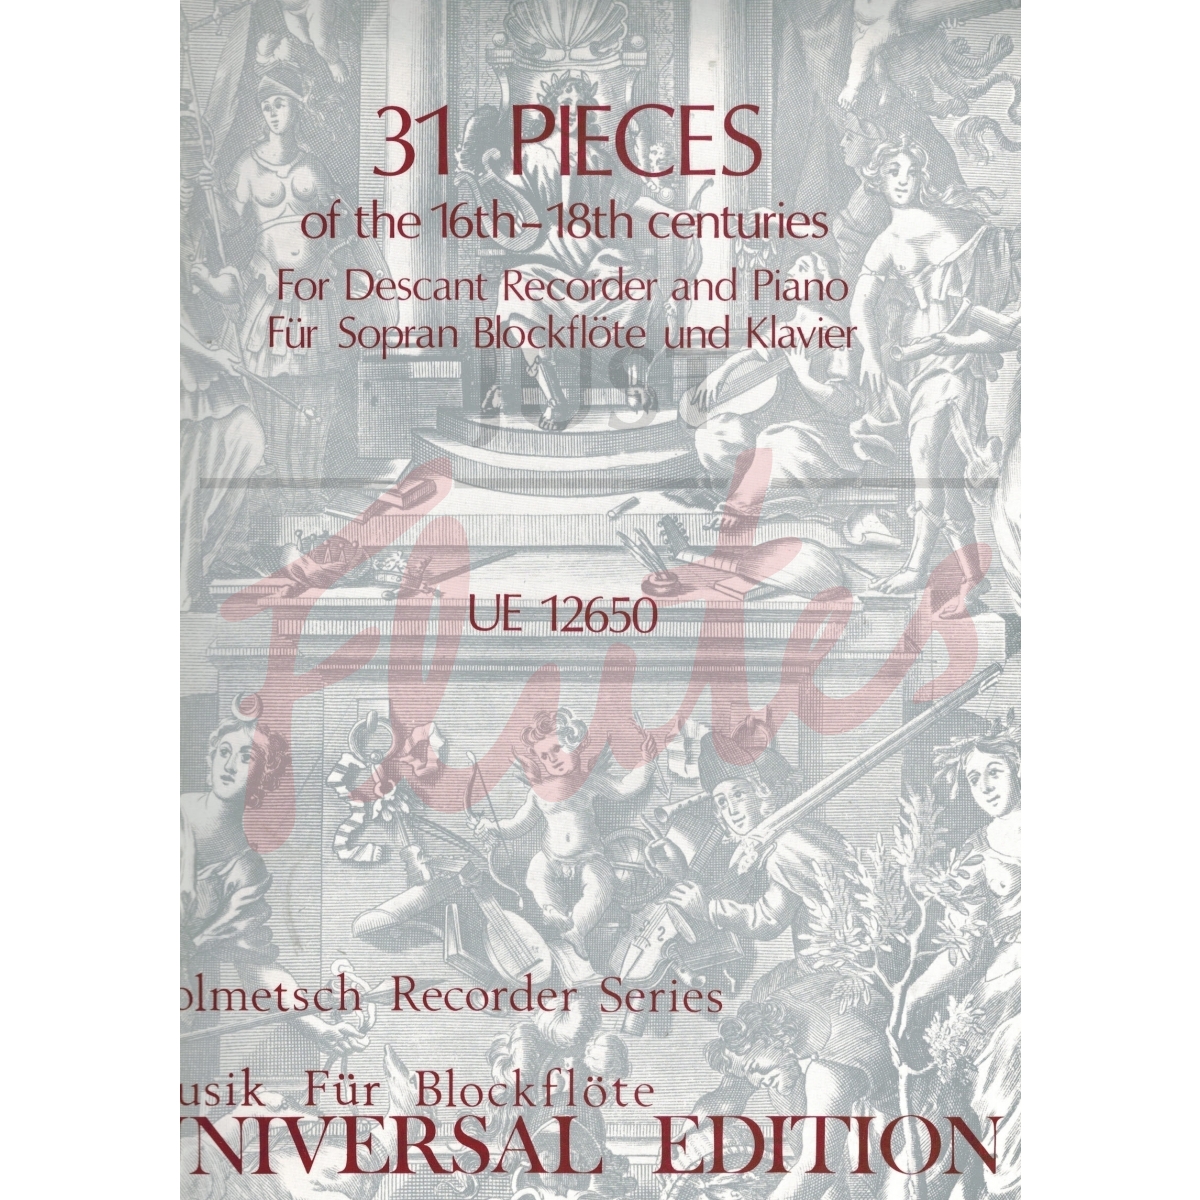 31 Pieces of the 16th-18th Centuries